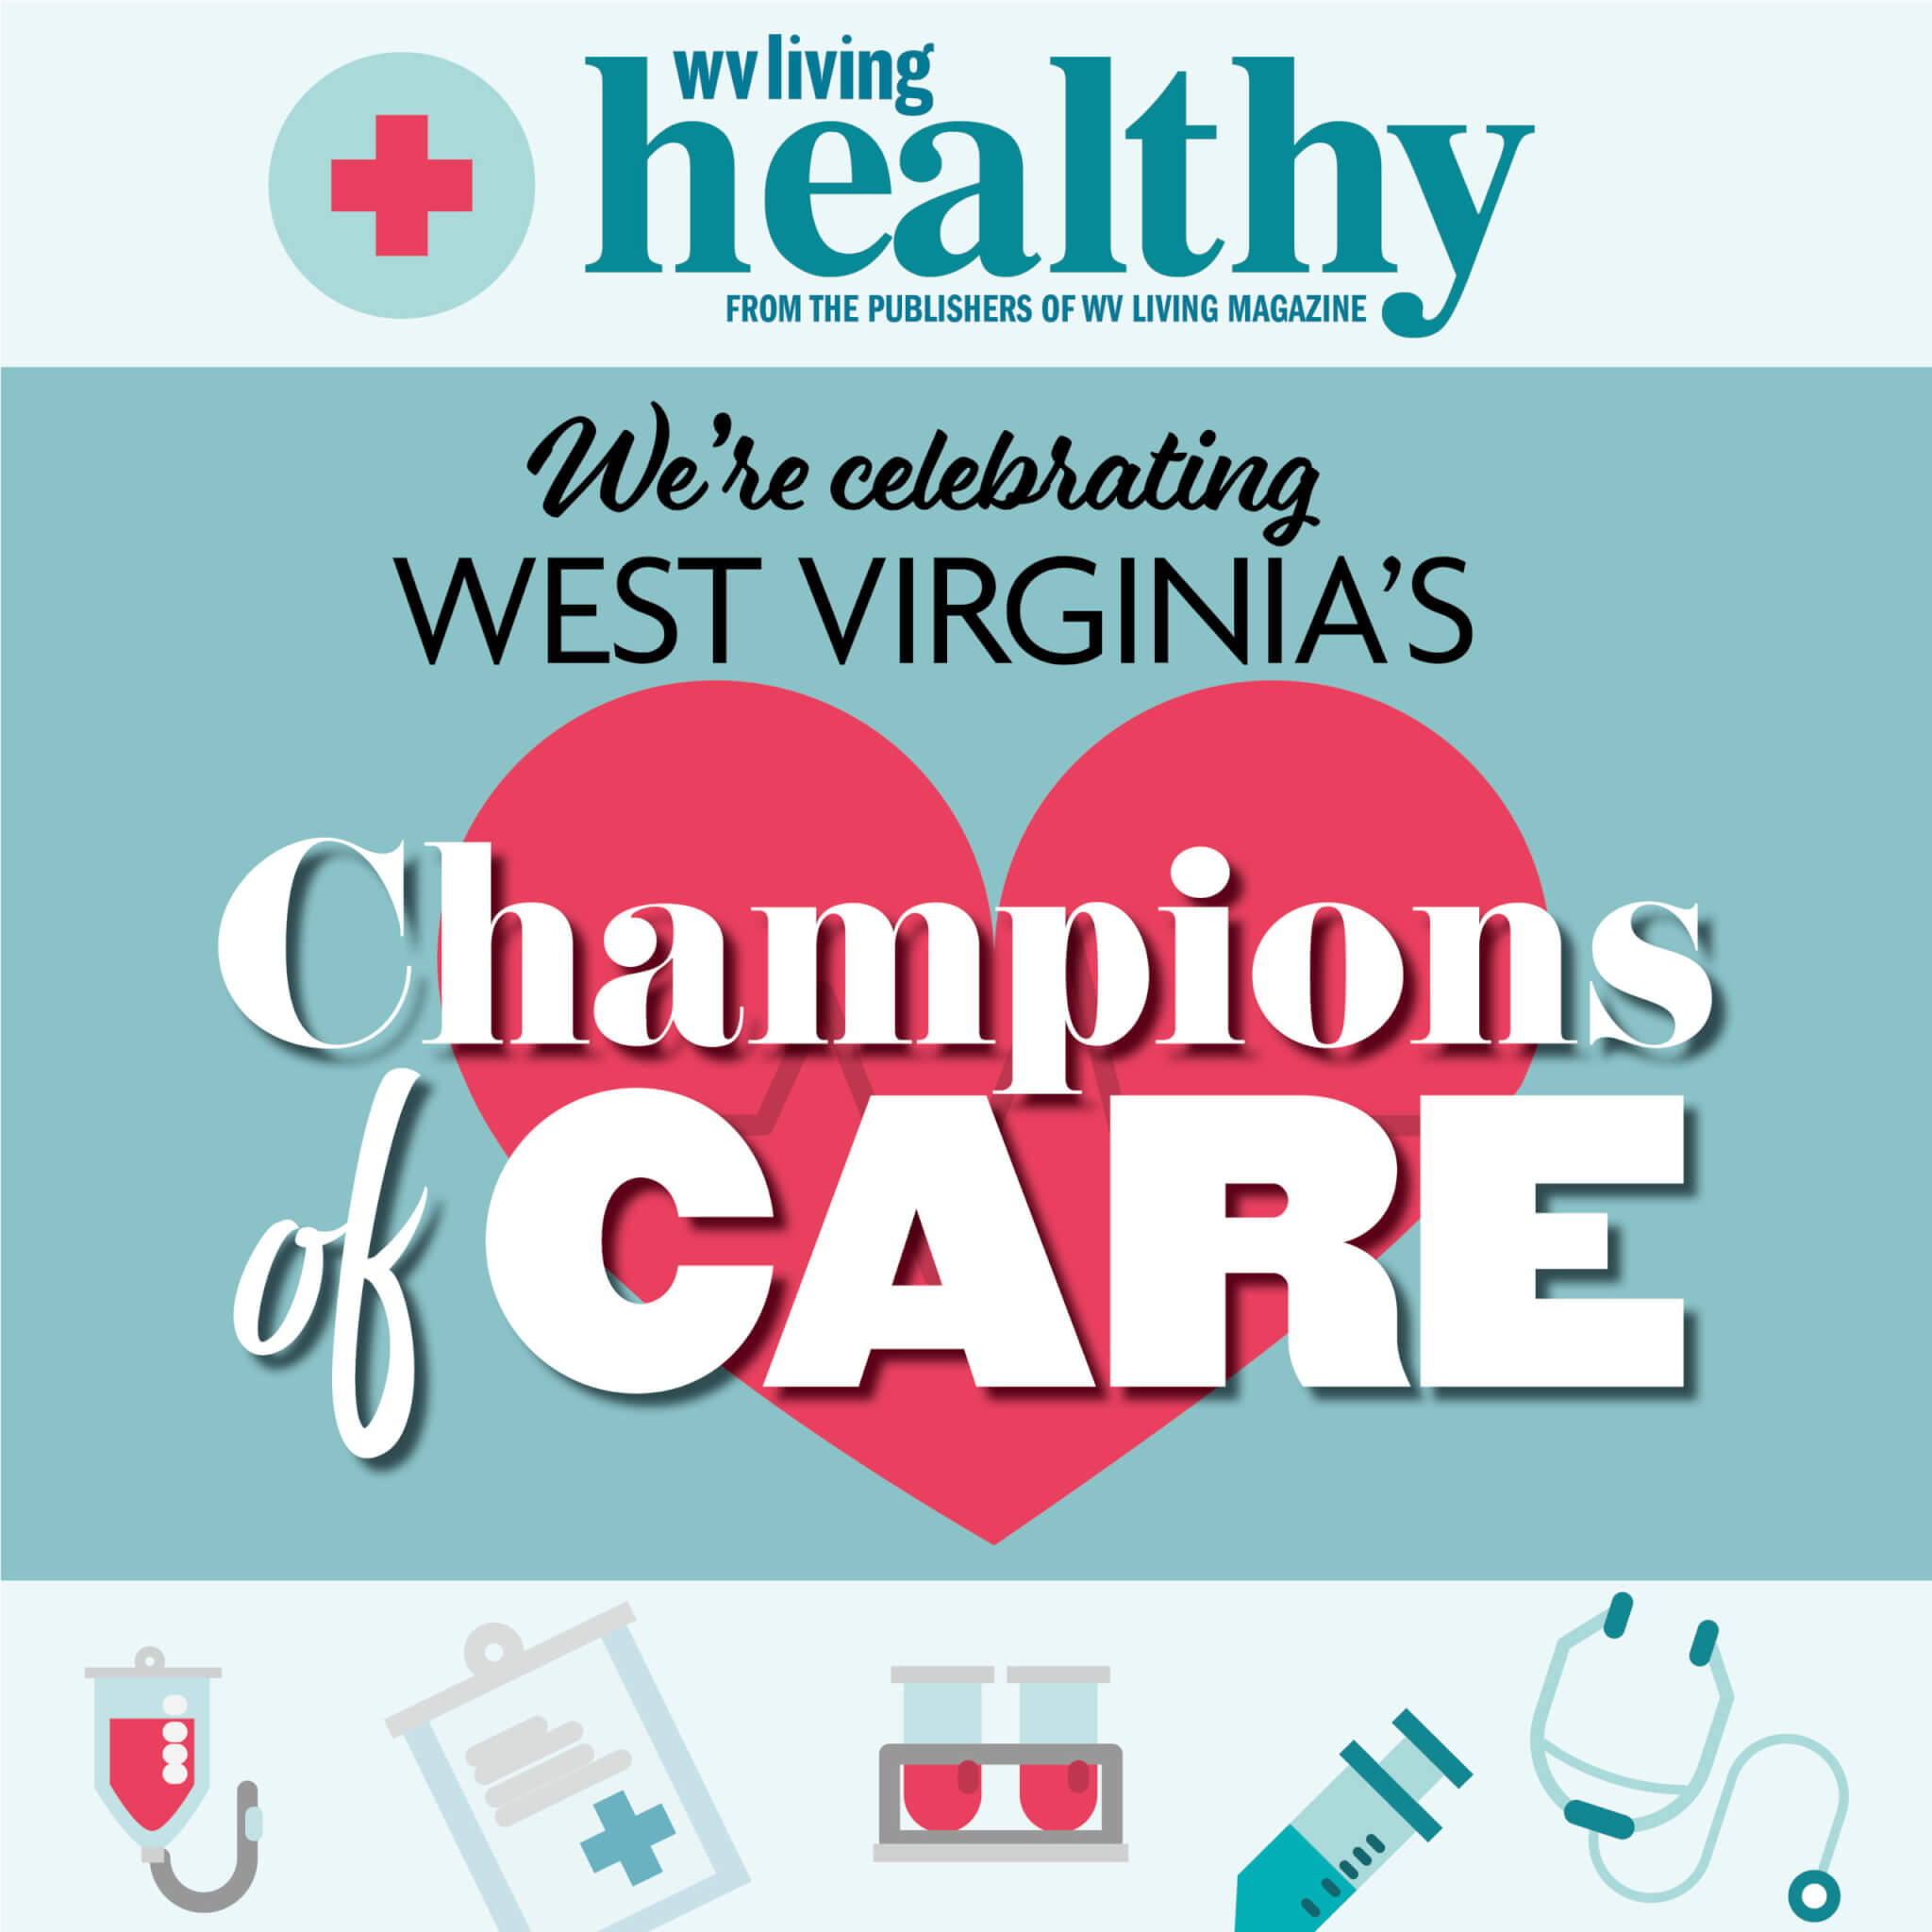 Champions of Care